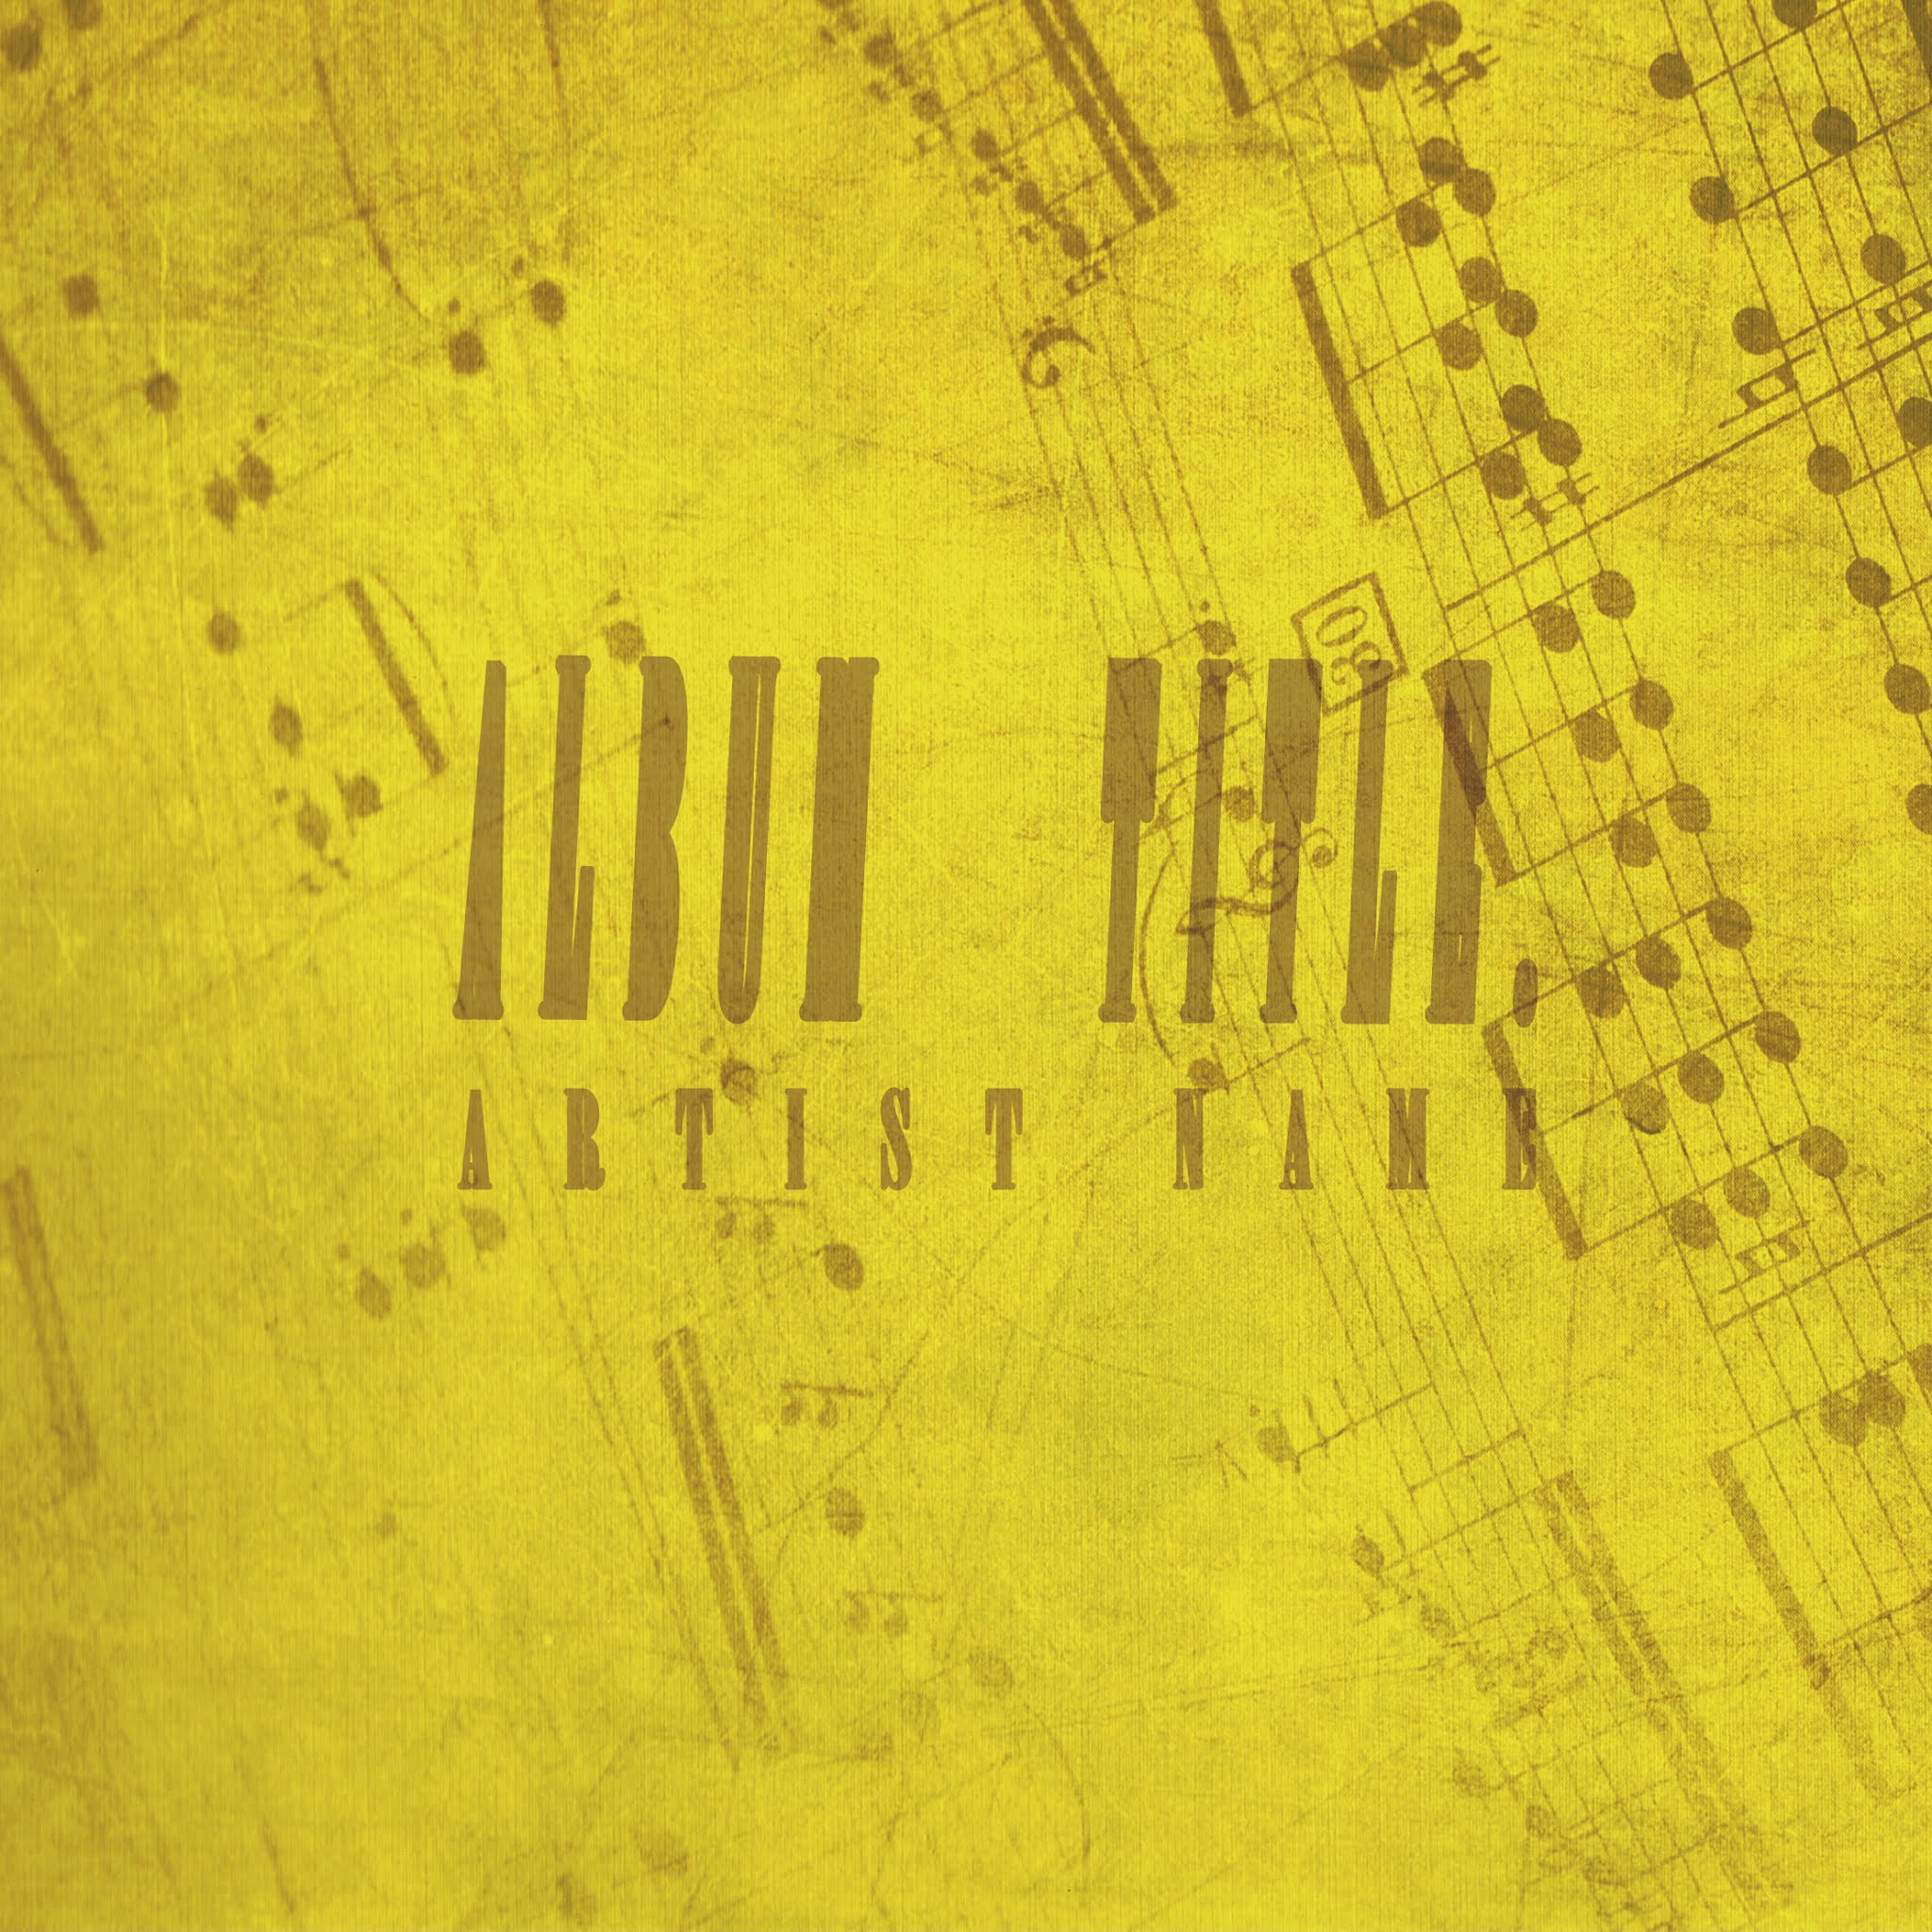 Professional CD design recommended for musicians that take music theory seriously - this stylish album cover features a sharp yellow tint with Photoshop style feel - You won't get this with free album cover design software - Great for instrumental music albums